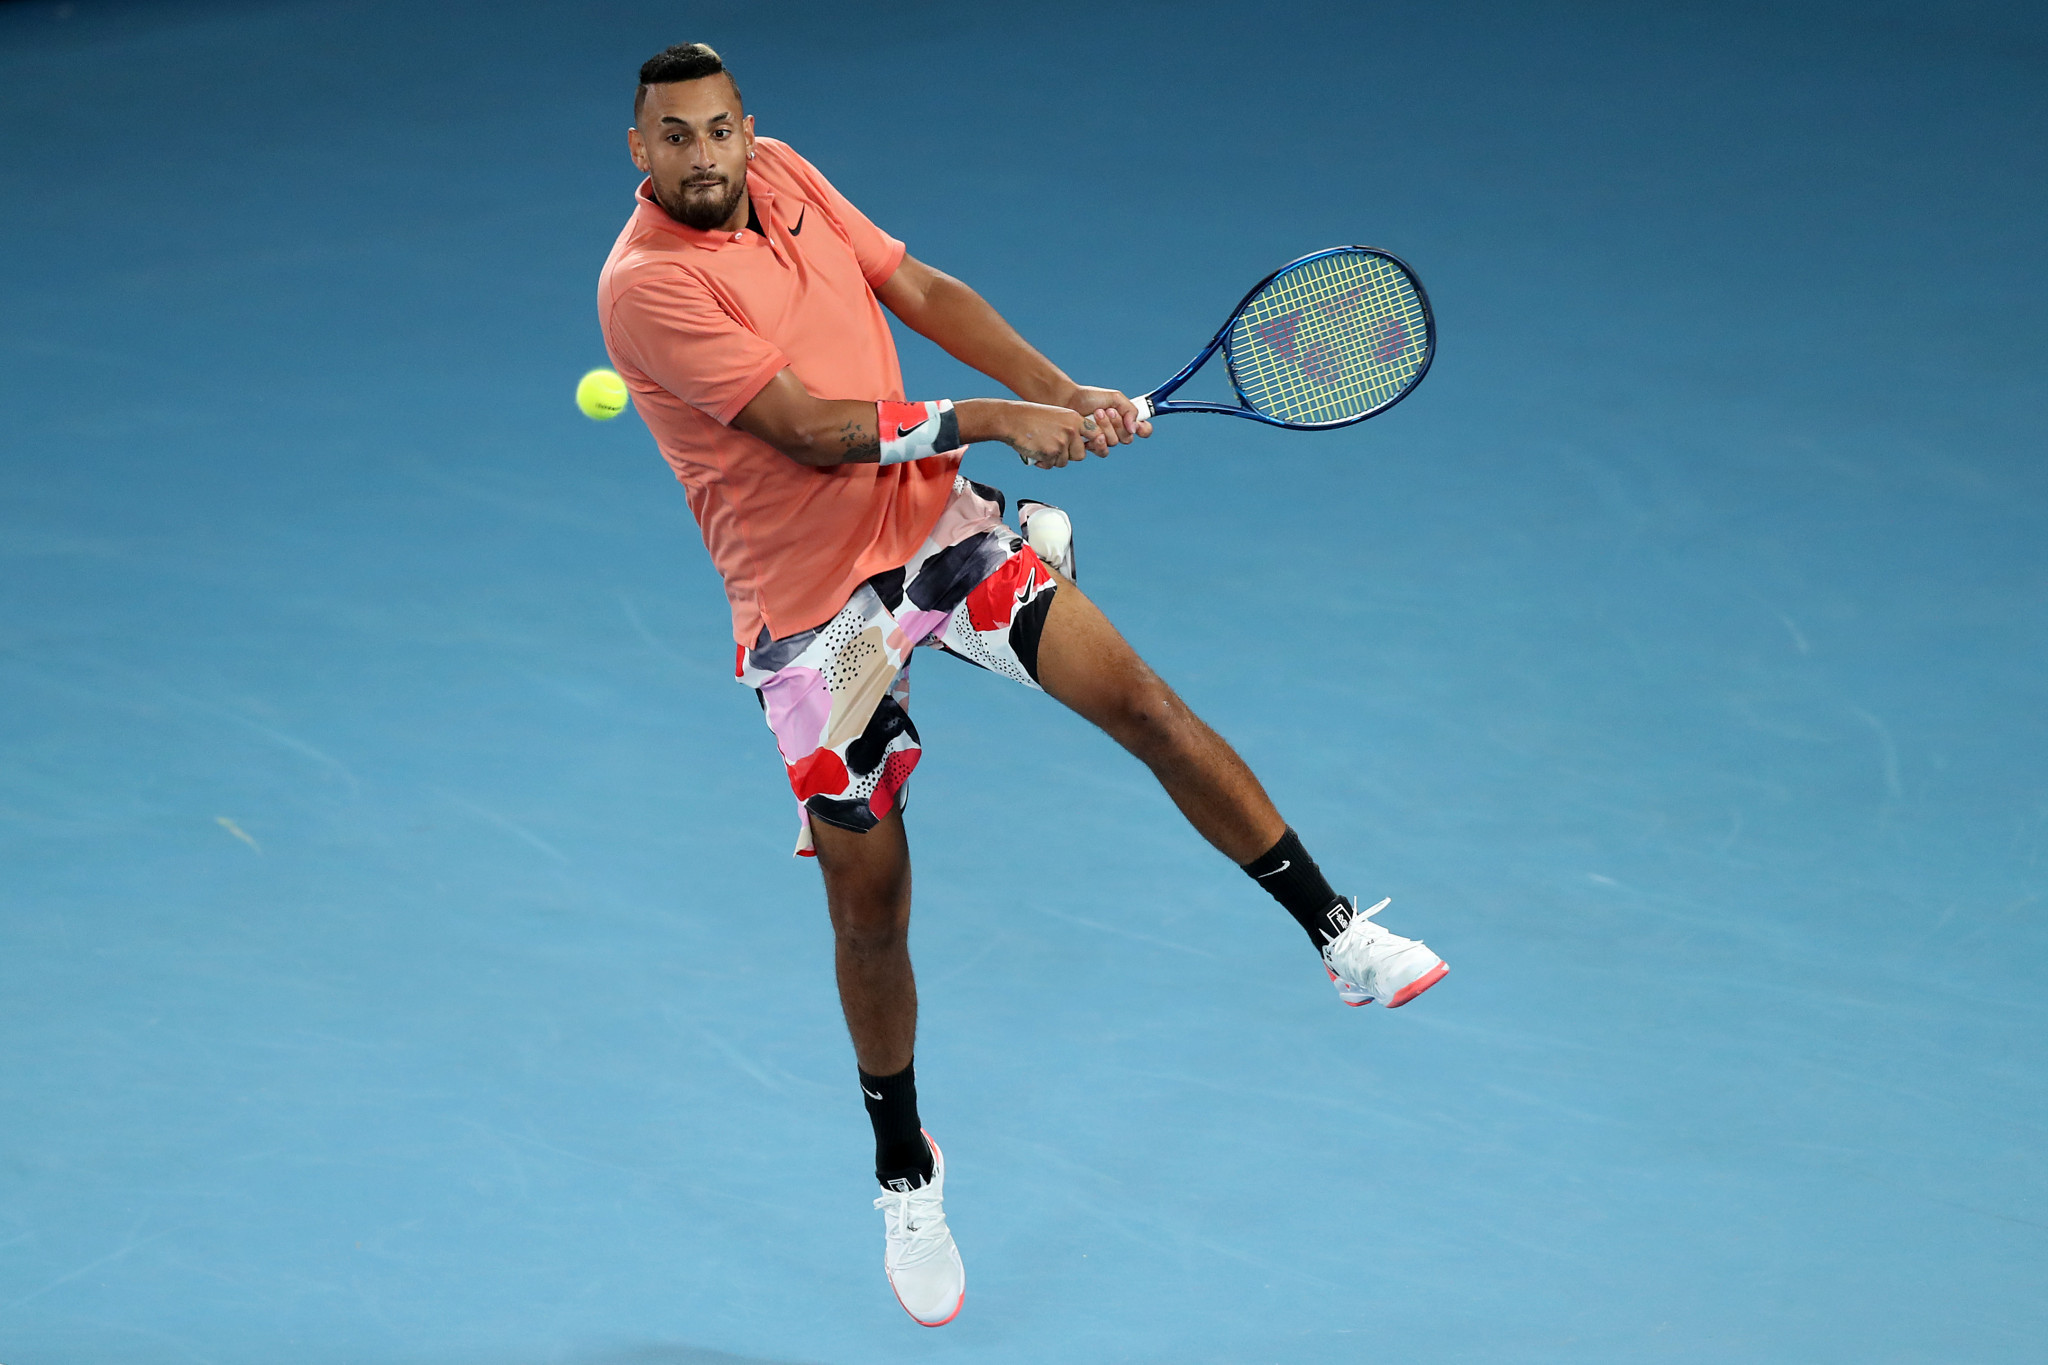 Kyrgios announces intention to compete at Tokyo 2020 after missing Rio 2016 due to AOC bust-up 